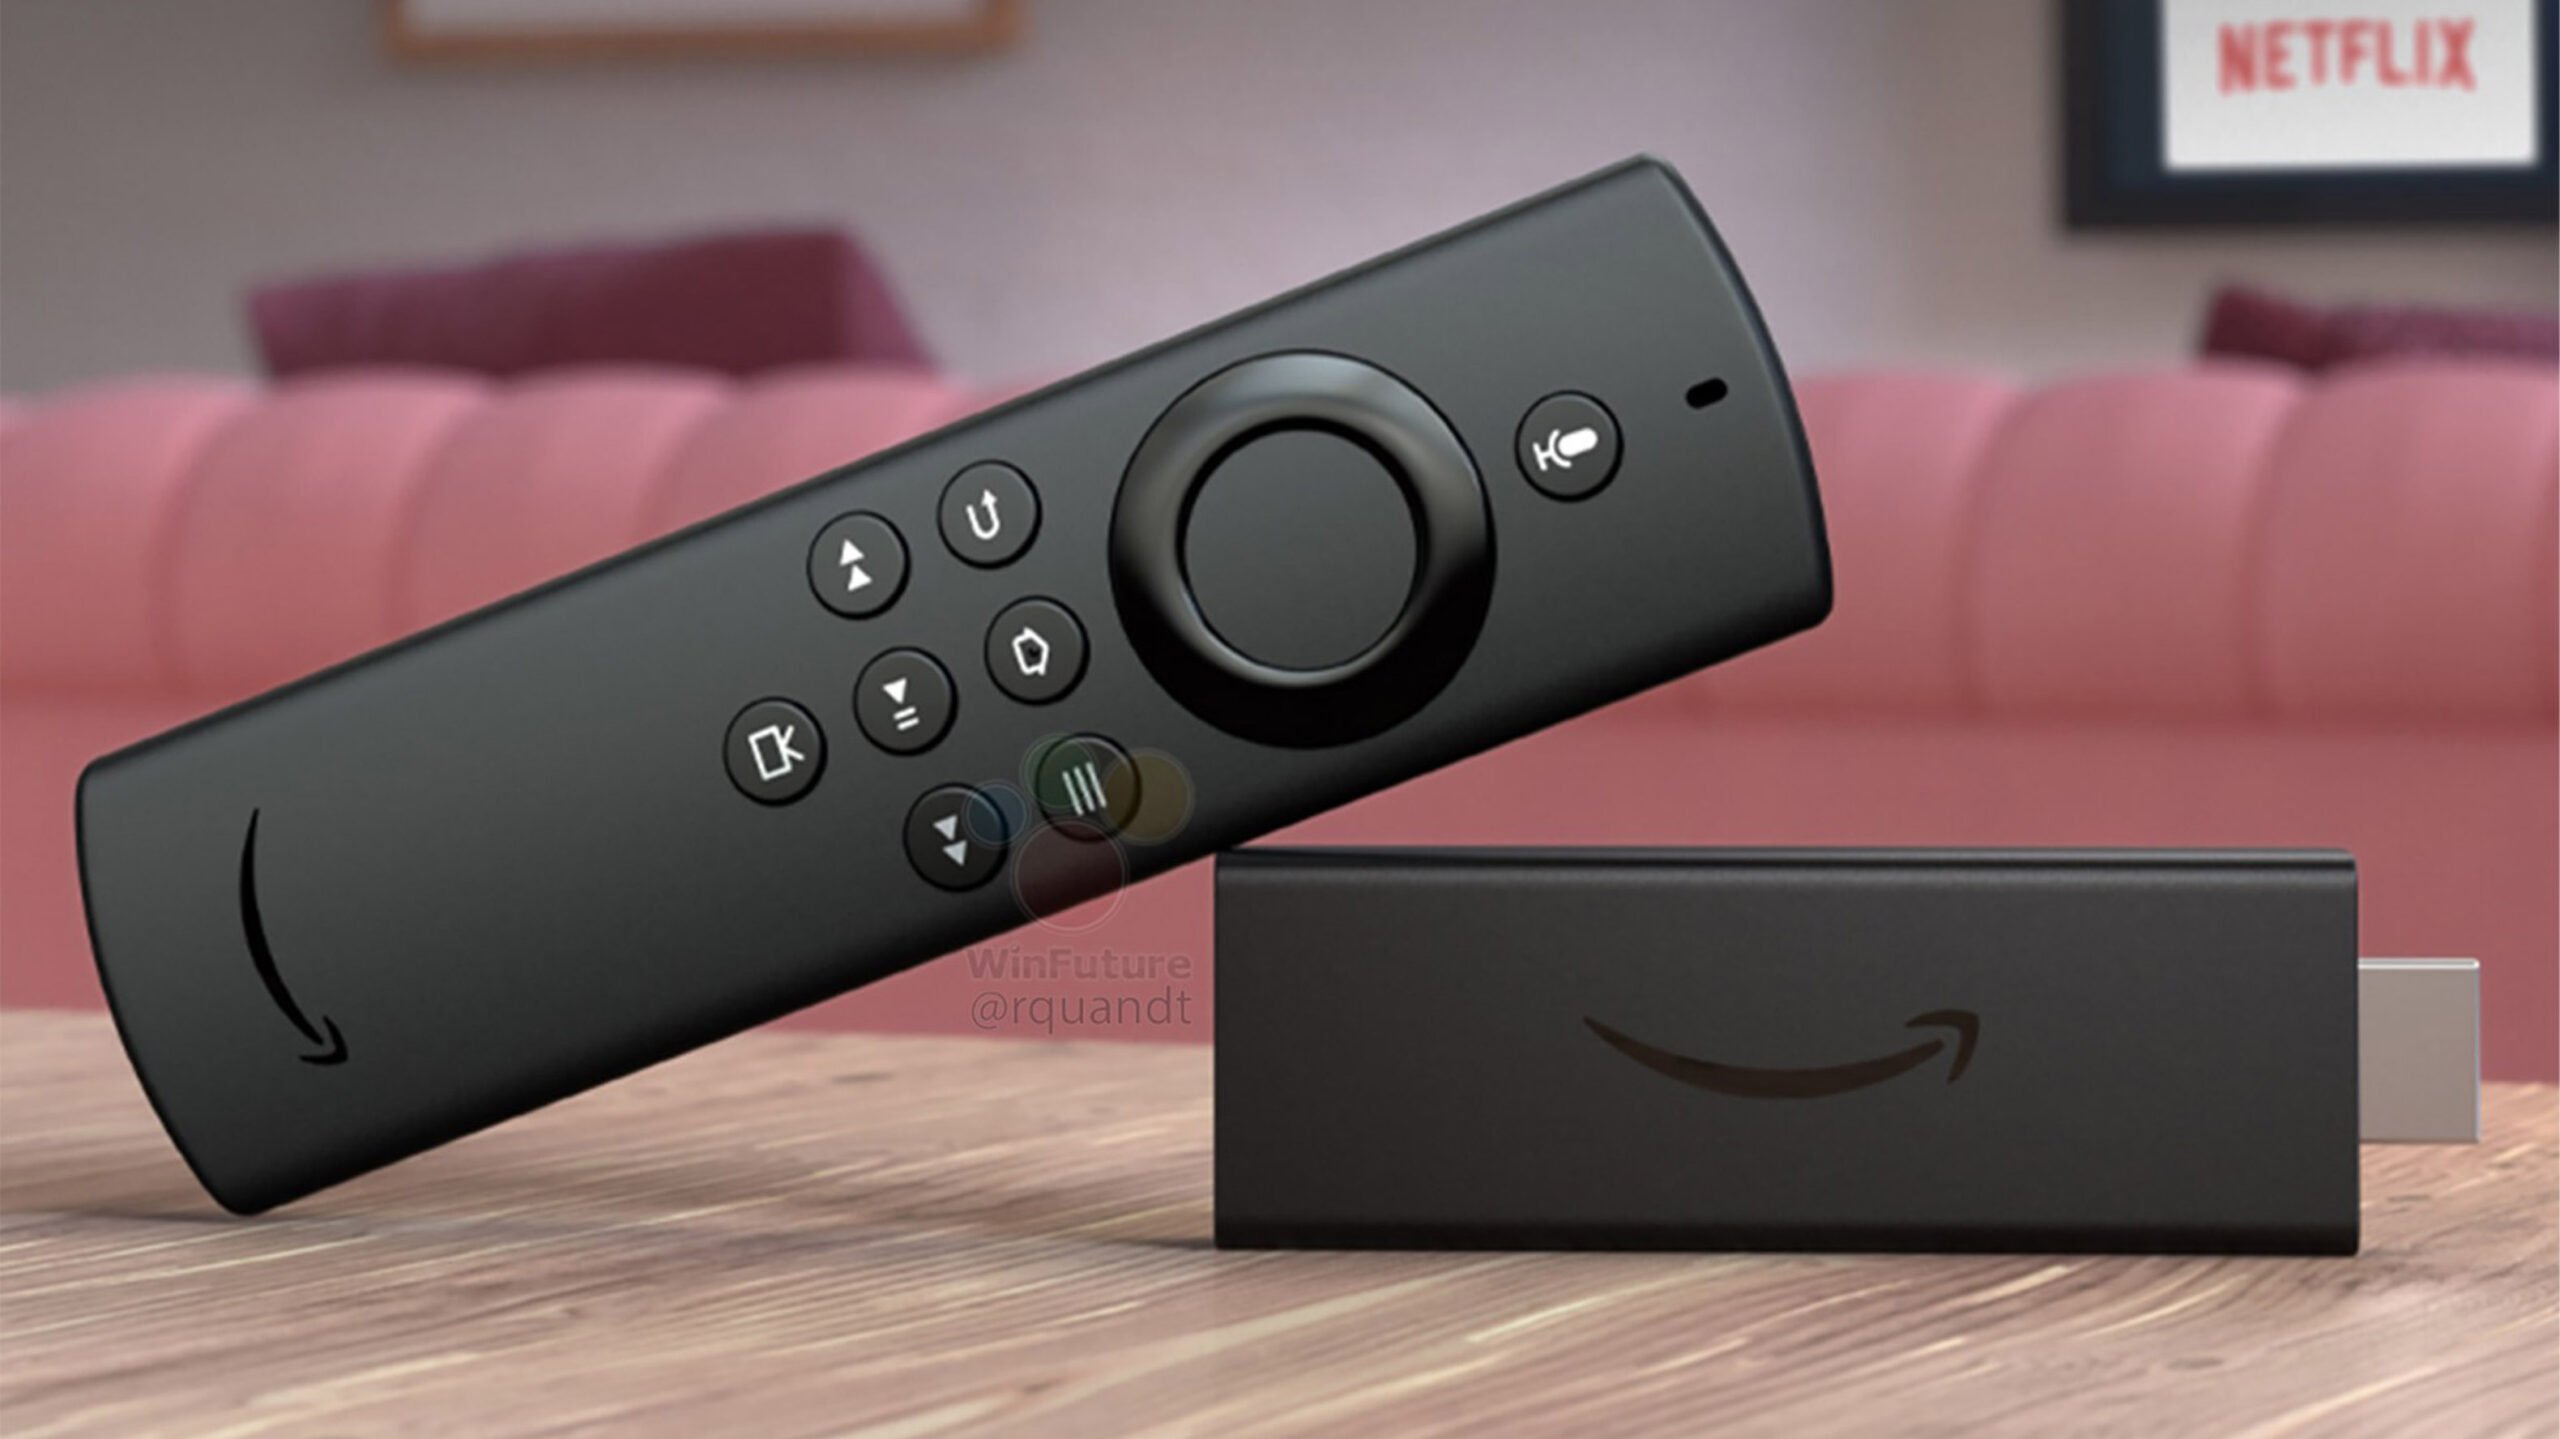 Leaked images reveal Amazon Fire TV Stick Lite with ...